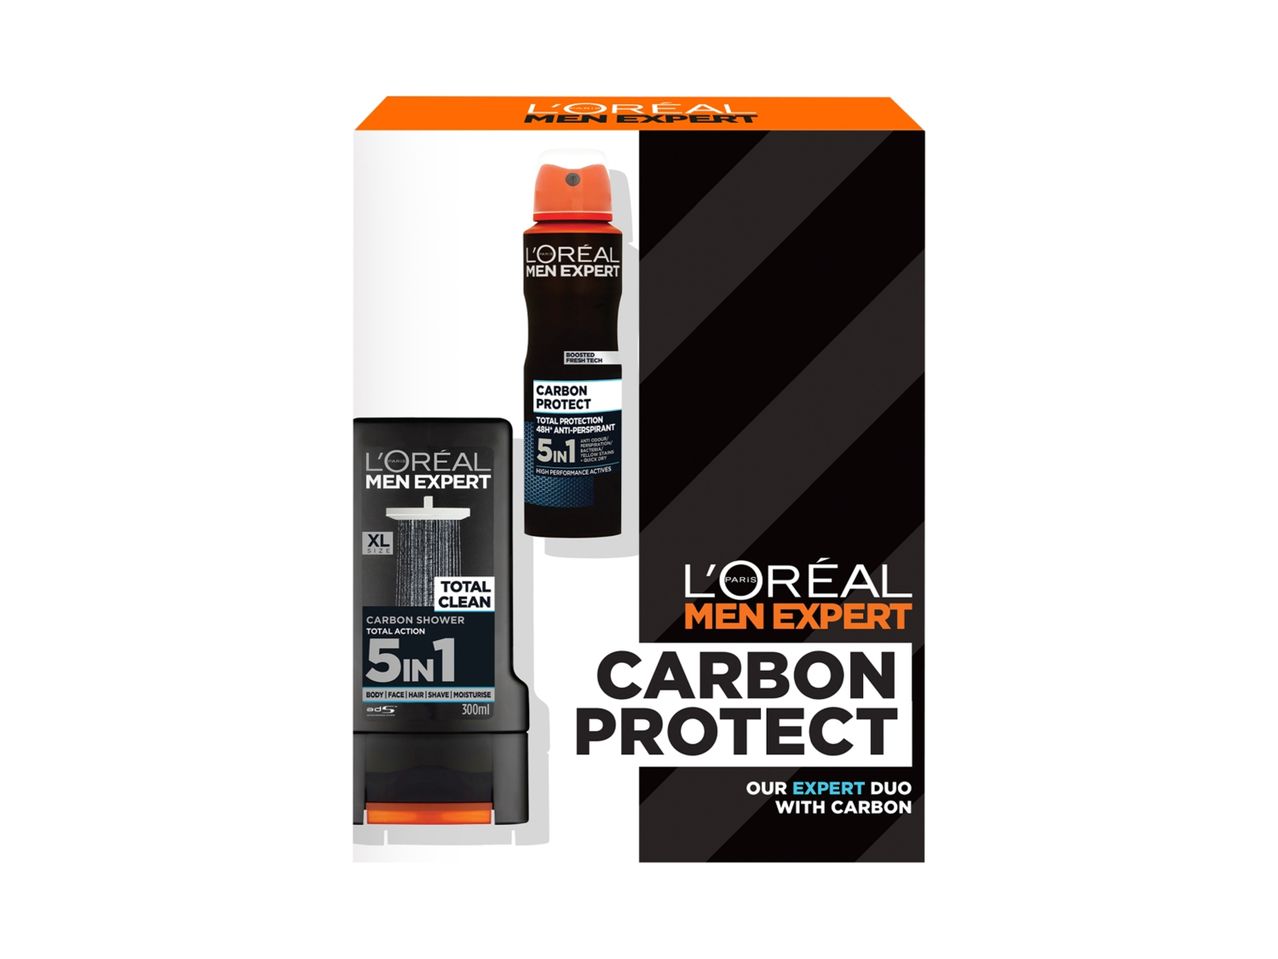 Go to full screen view: L'Oreal Men Expert Carbon Protect Gift Set - Image 1